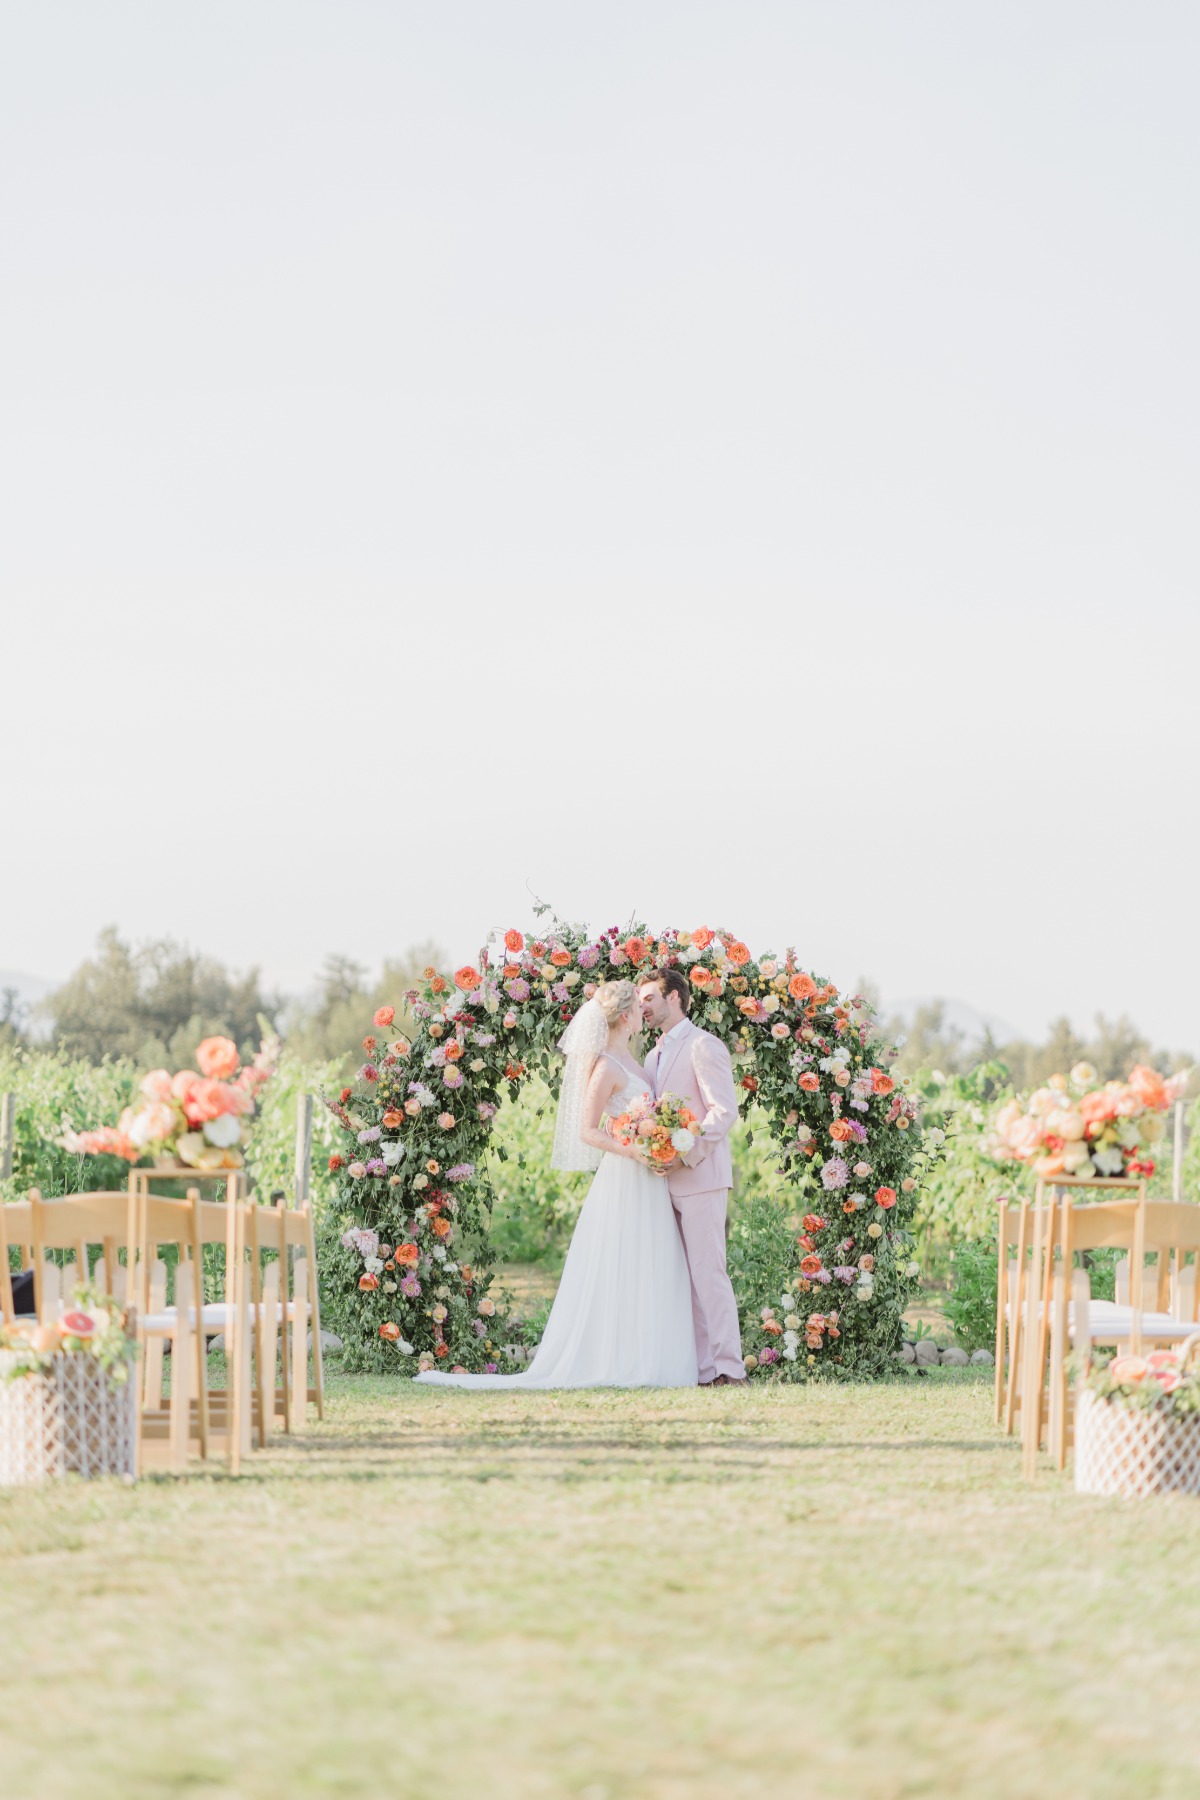 Large wedding arch with flowers